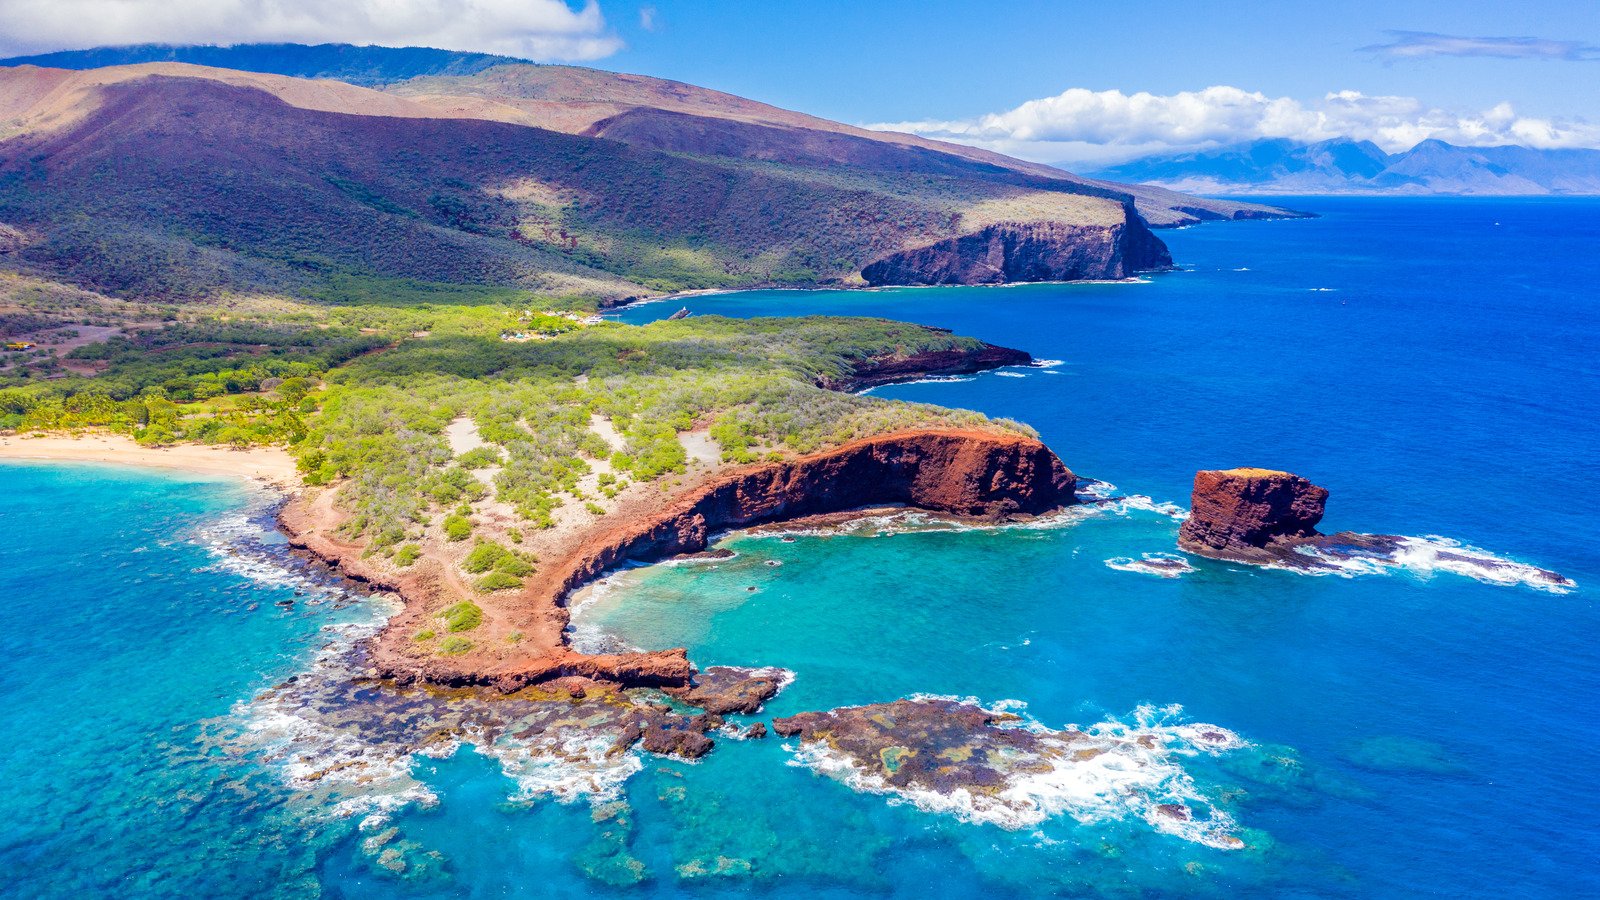 Many Beaches In Hawaii Hold A Colorful Secret